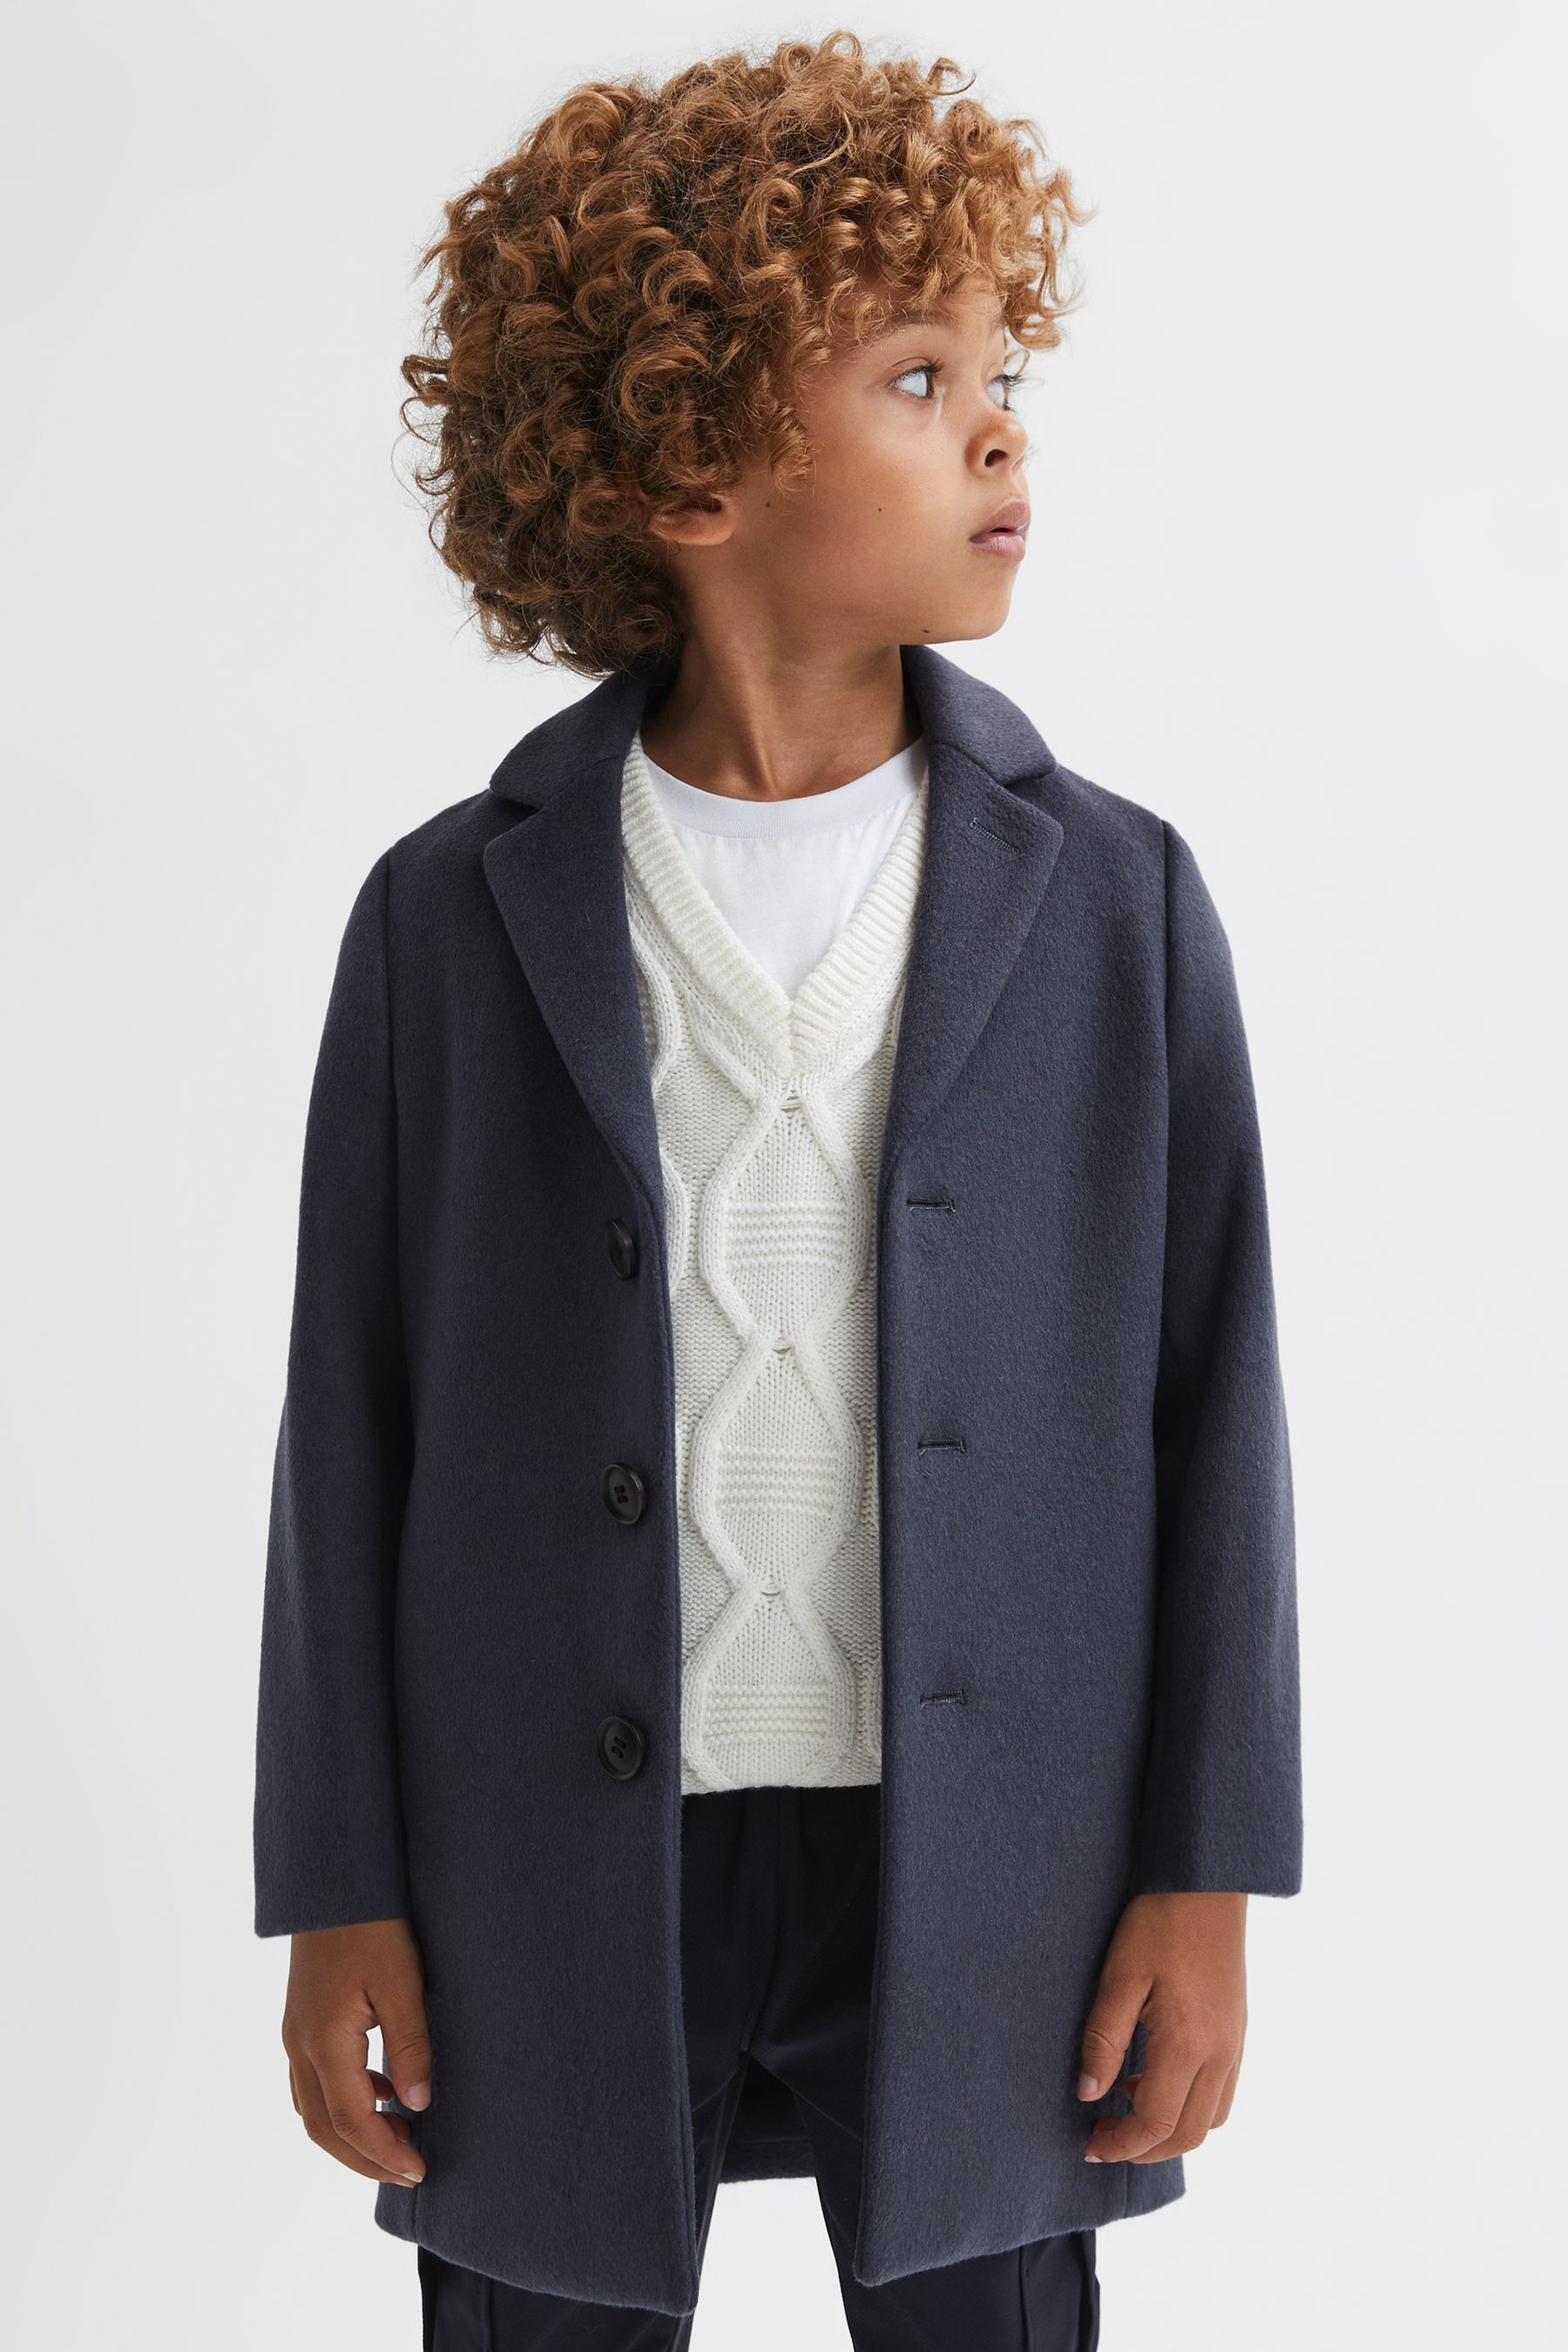 REISS GABLE - AIRFORCE BLUE JUNIOR SINGLE BREASTED EPSOM OVERCOAT, AGE 8-9 YEARS